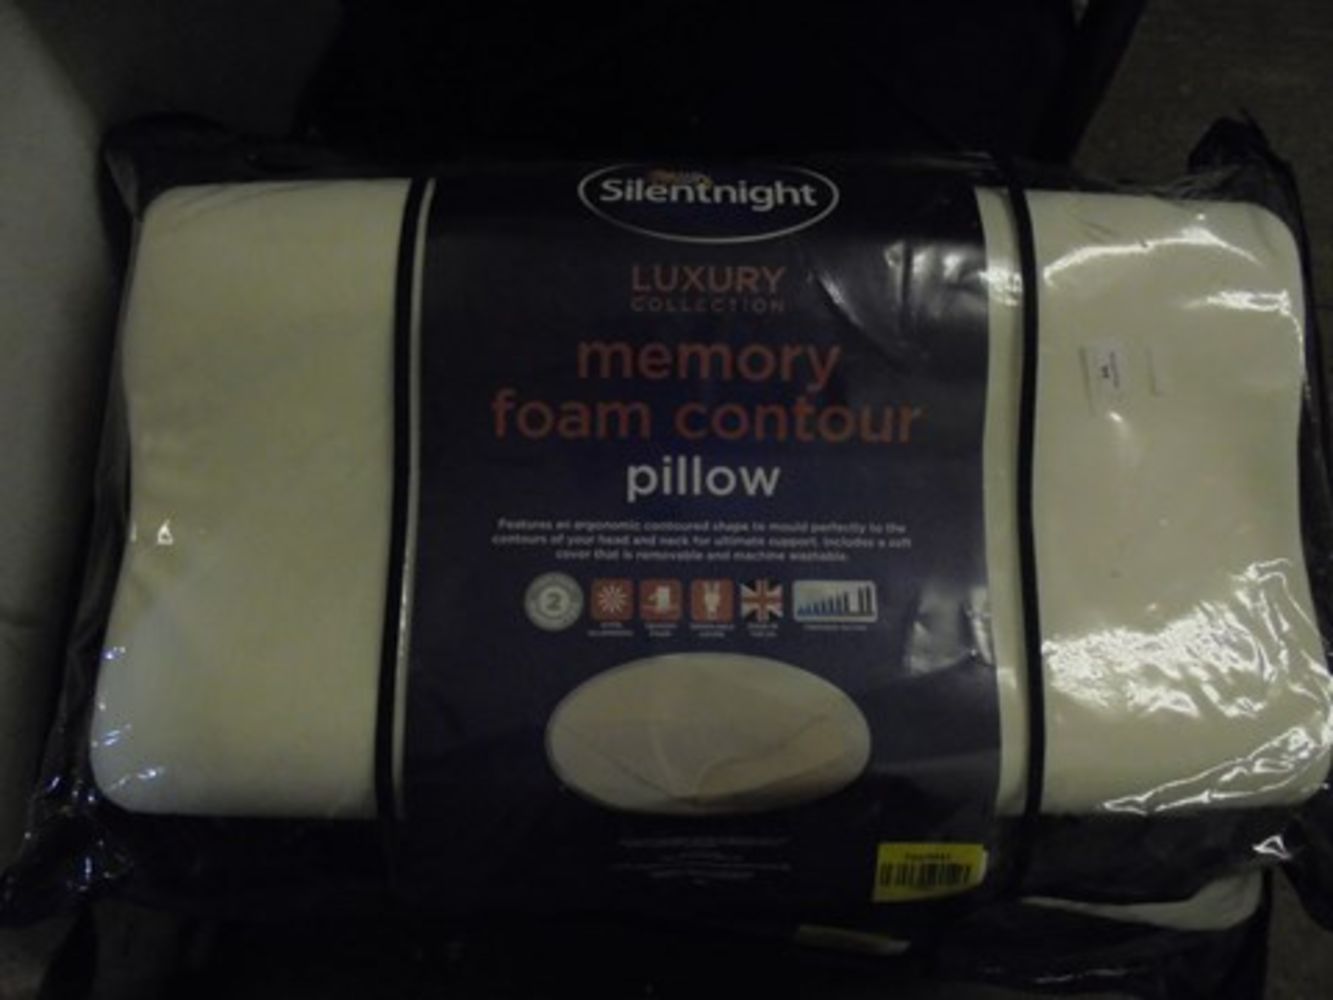 Bedding auction containing; Silent Night duvets, memory foam pillows, memory foam mattress toppers and much more!!!